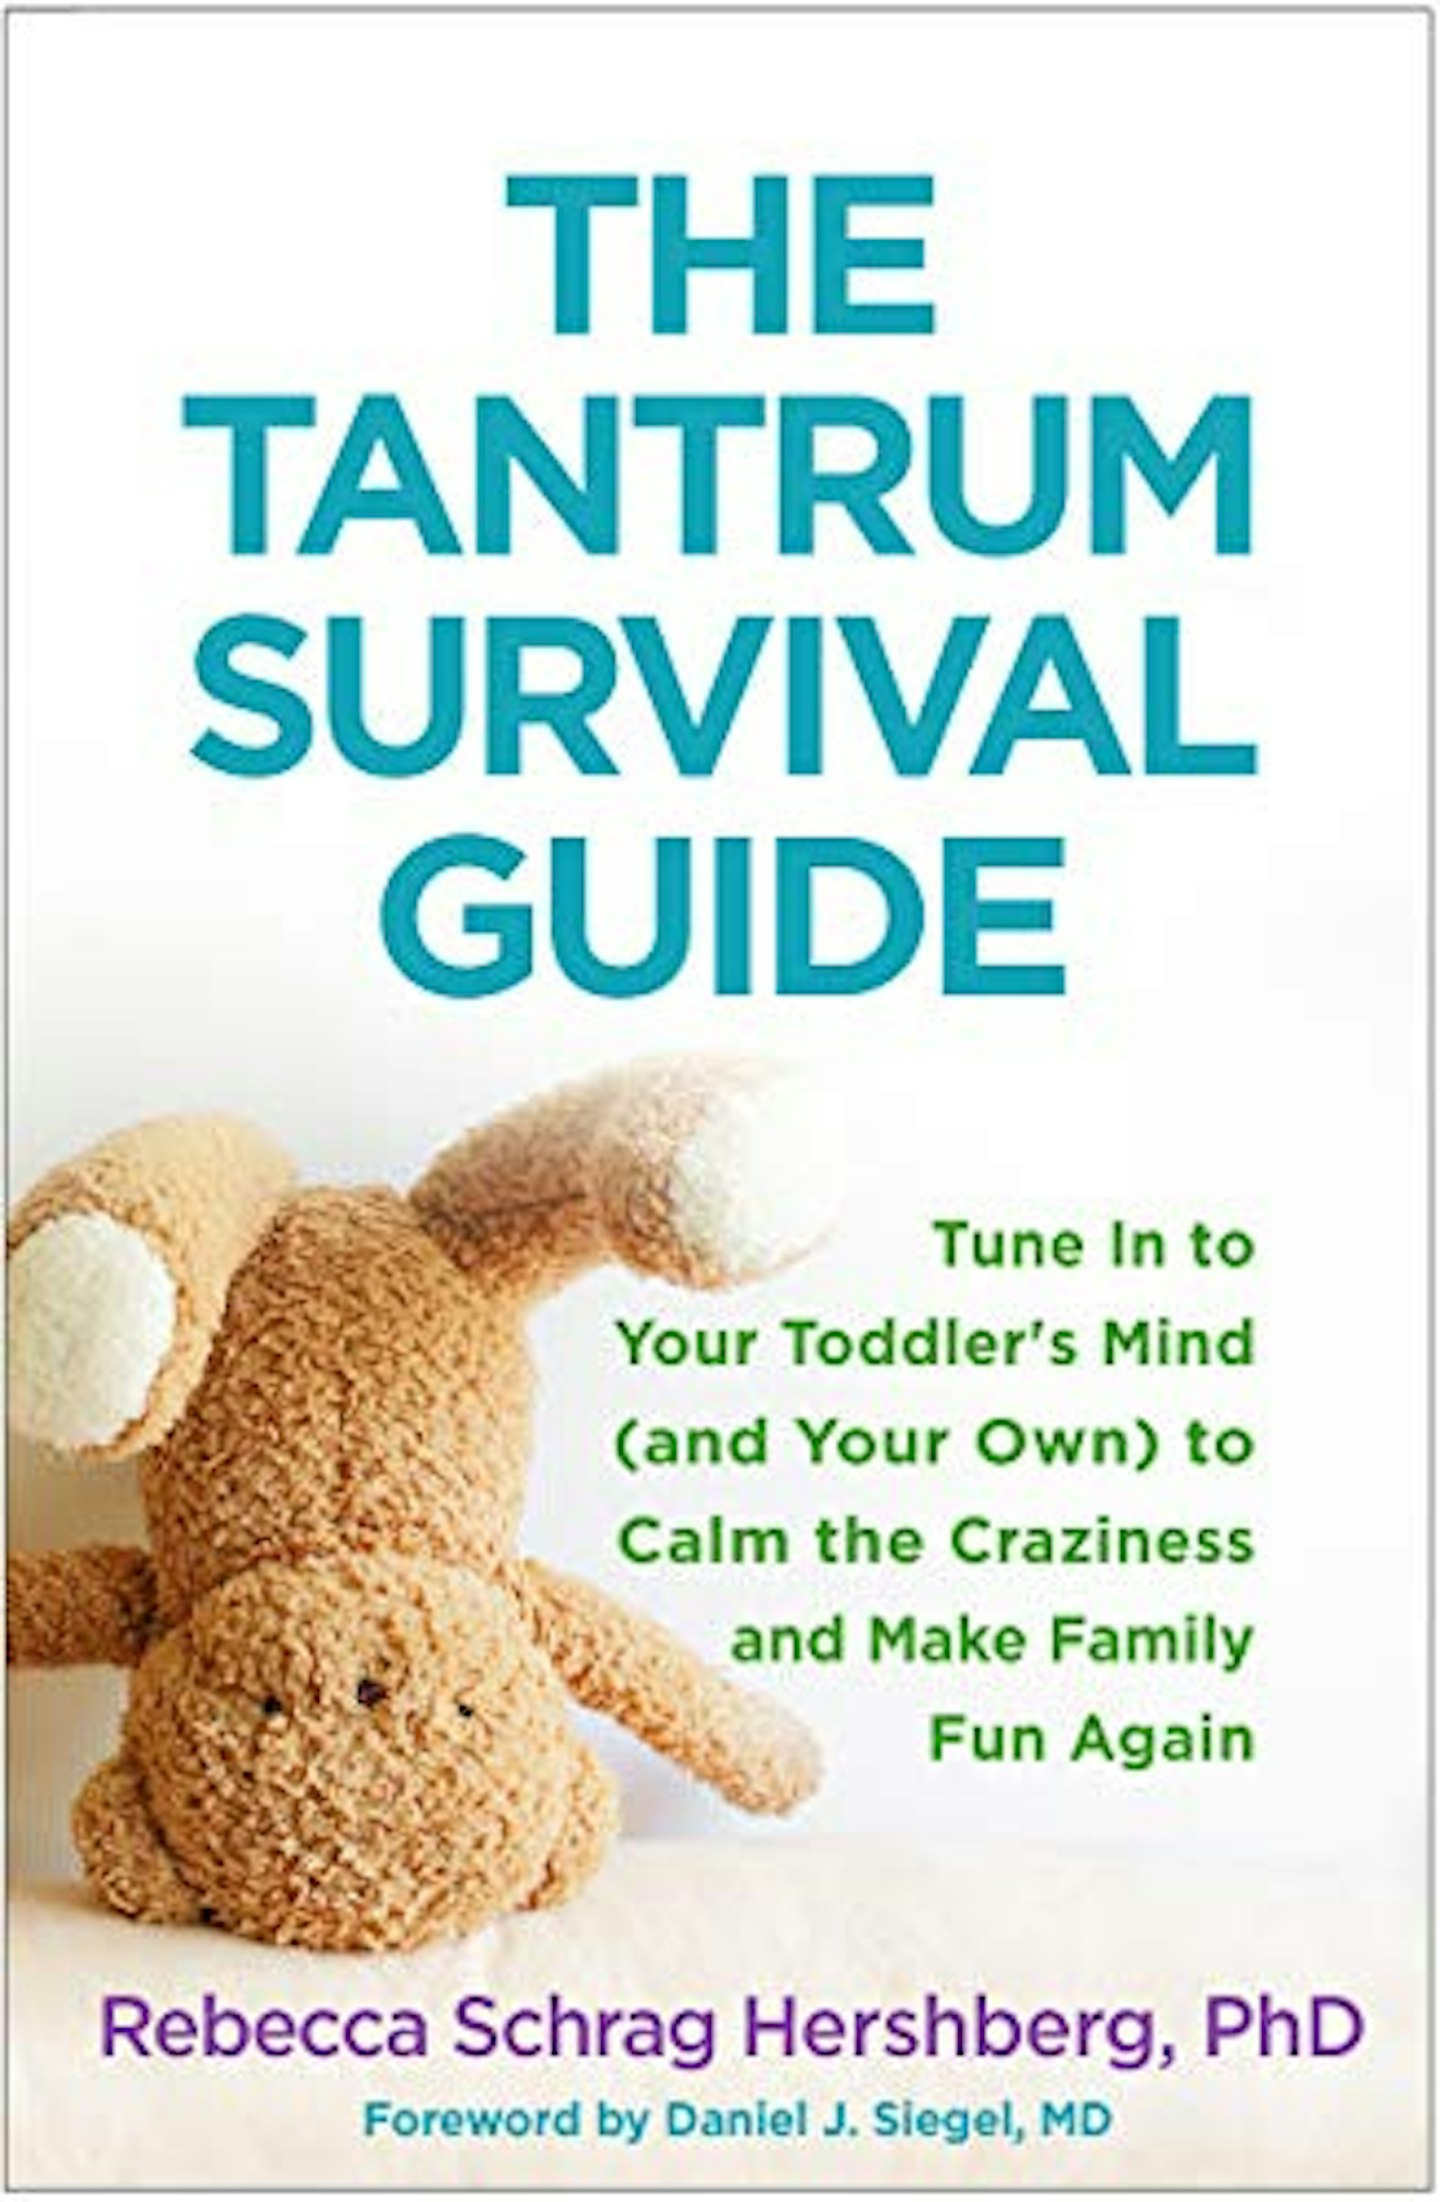 The Tantrum Survival Guide: Tune In to Your Toddleru0026#039;s Mind (and Your Own) to Calm the Craziness and Make Family Fun Again